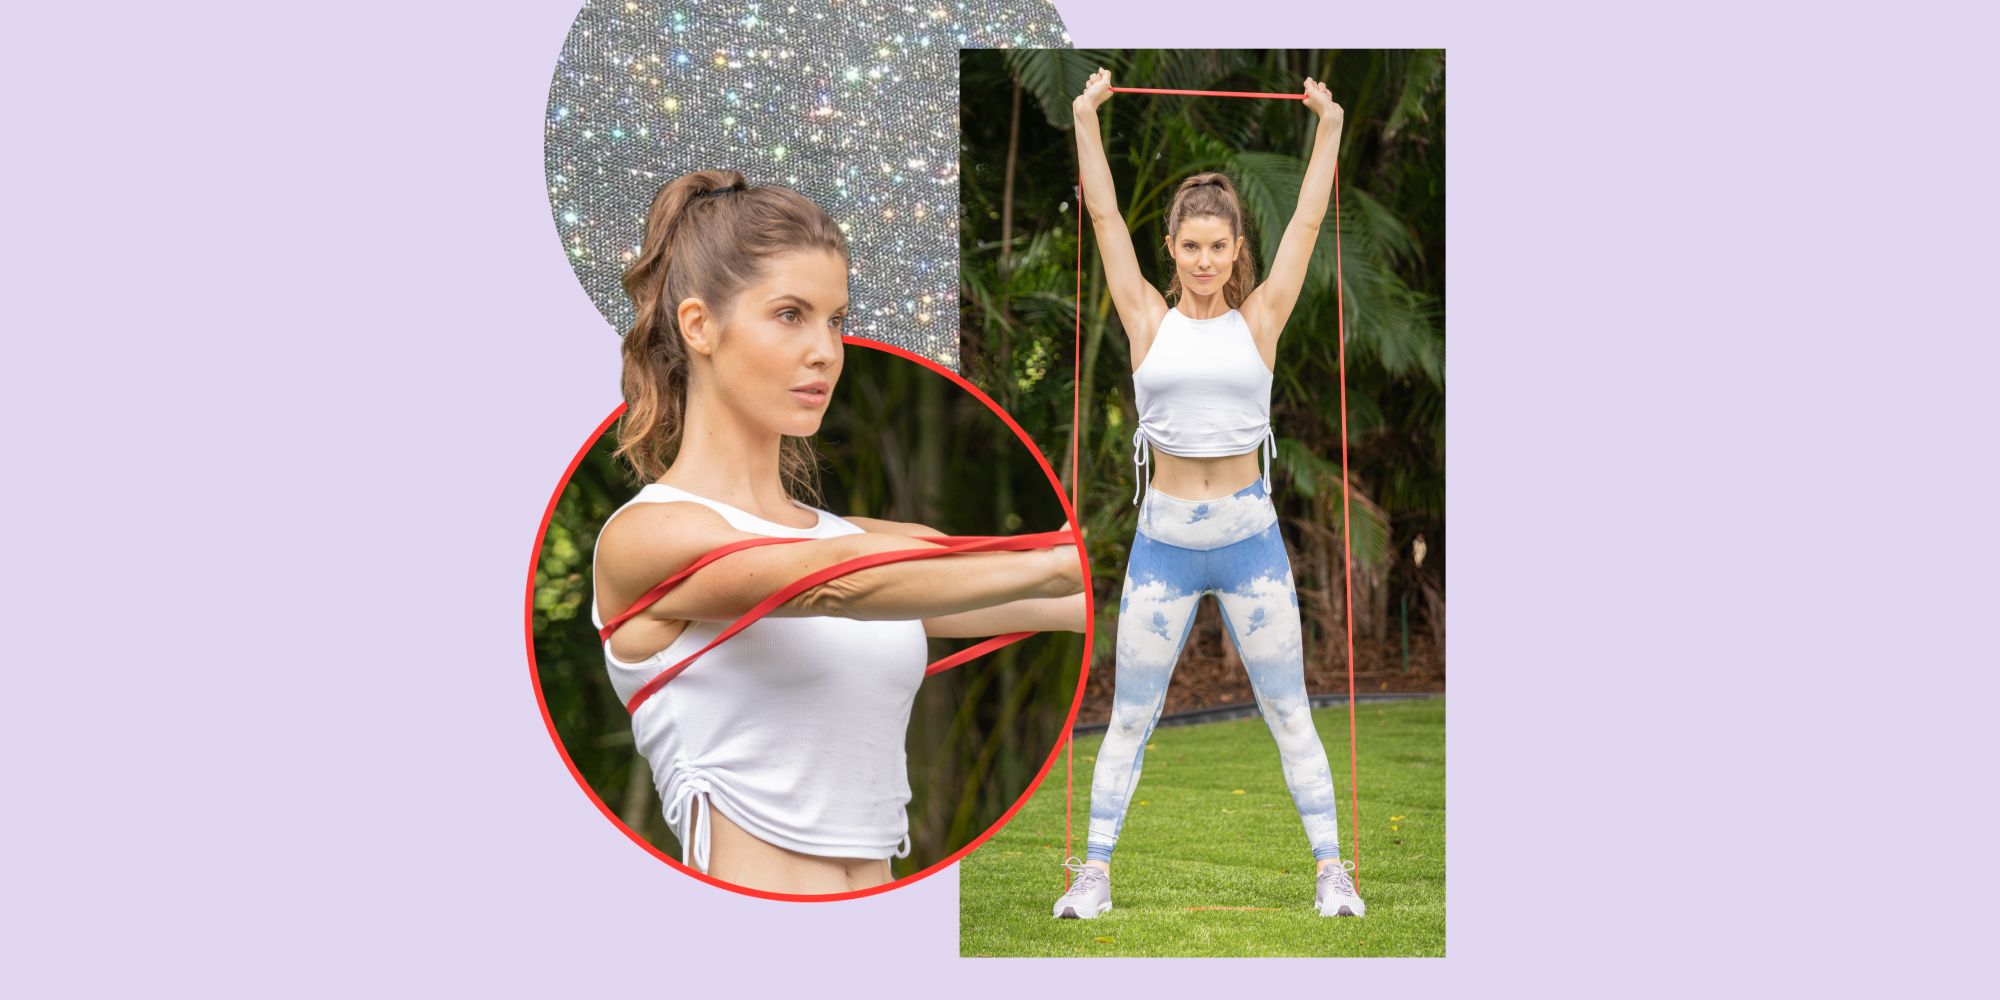 Amanda Cerny Brother And Sister Sex Videos - Amanda Cerny on creating a fitness routine that really sticks